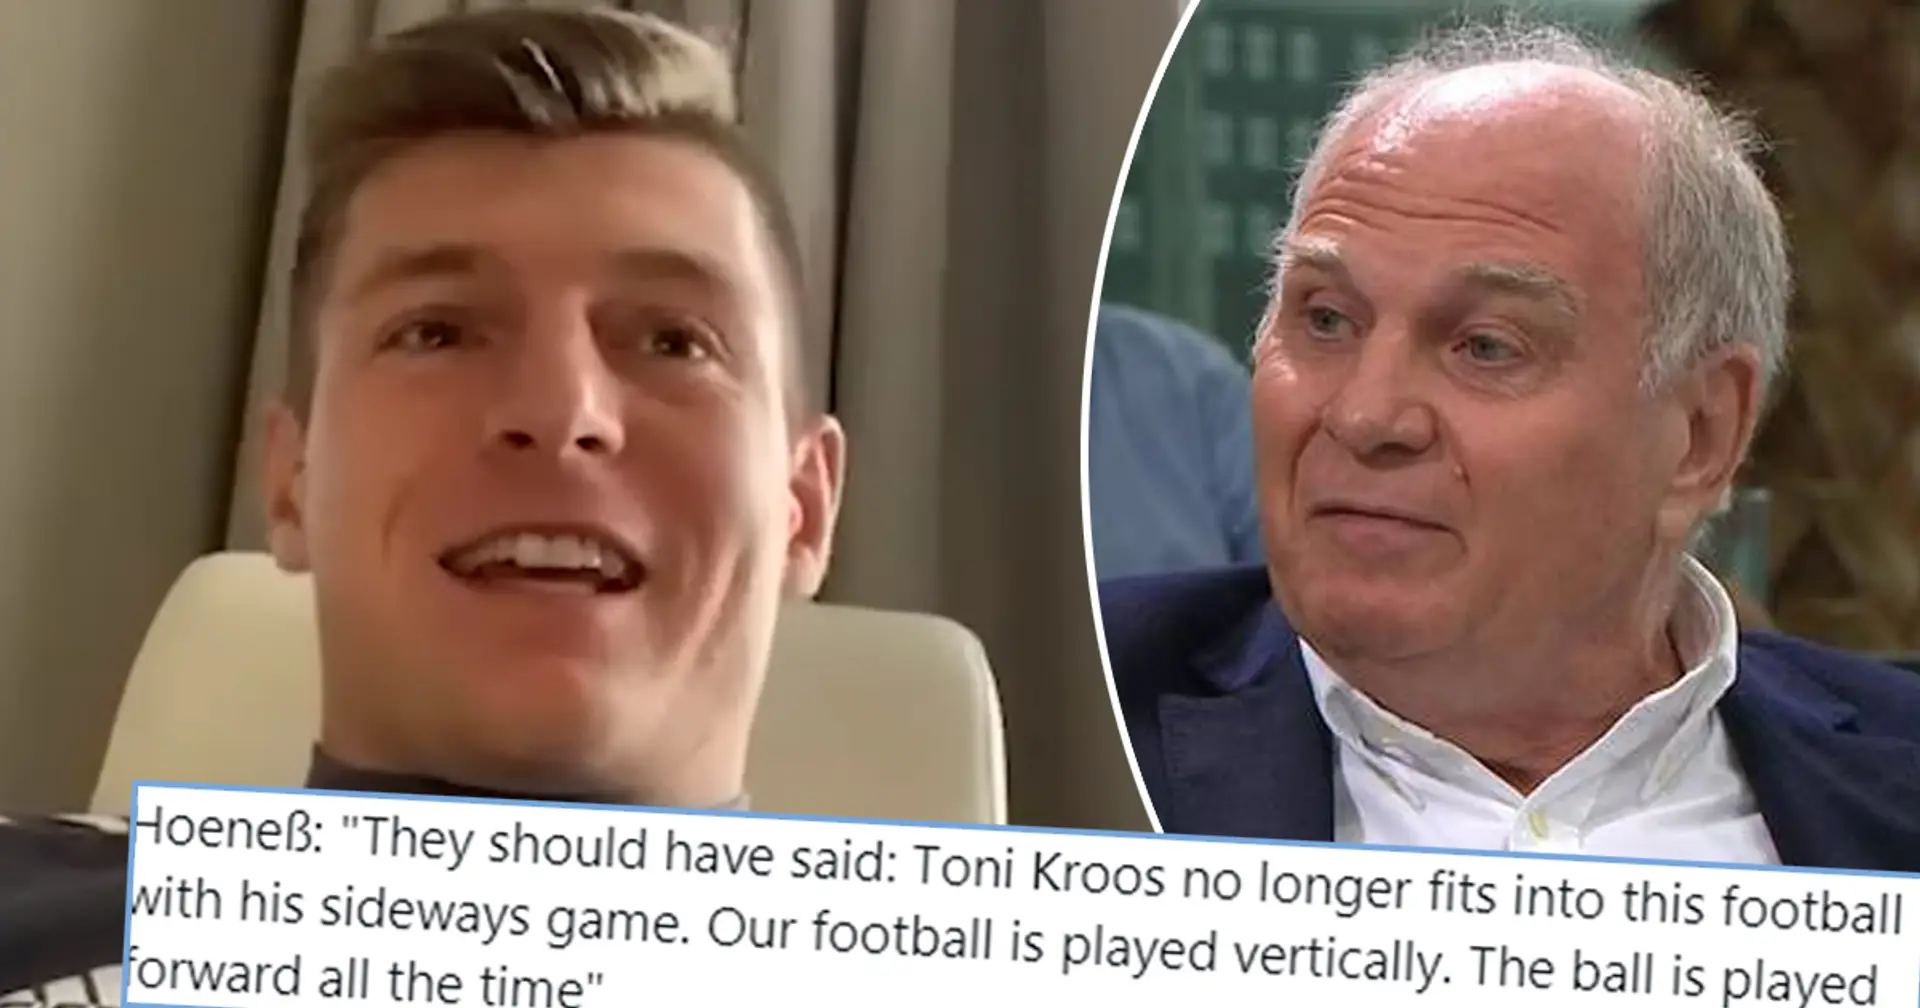 Bayern legend Hoeness says Kroos 'does not fit today's football', Toni gives truly savage response